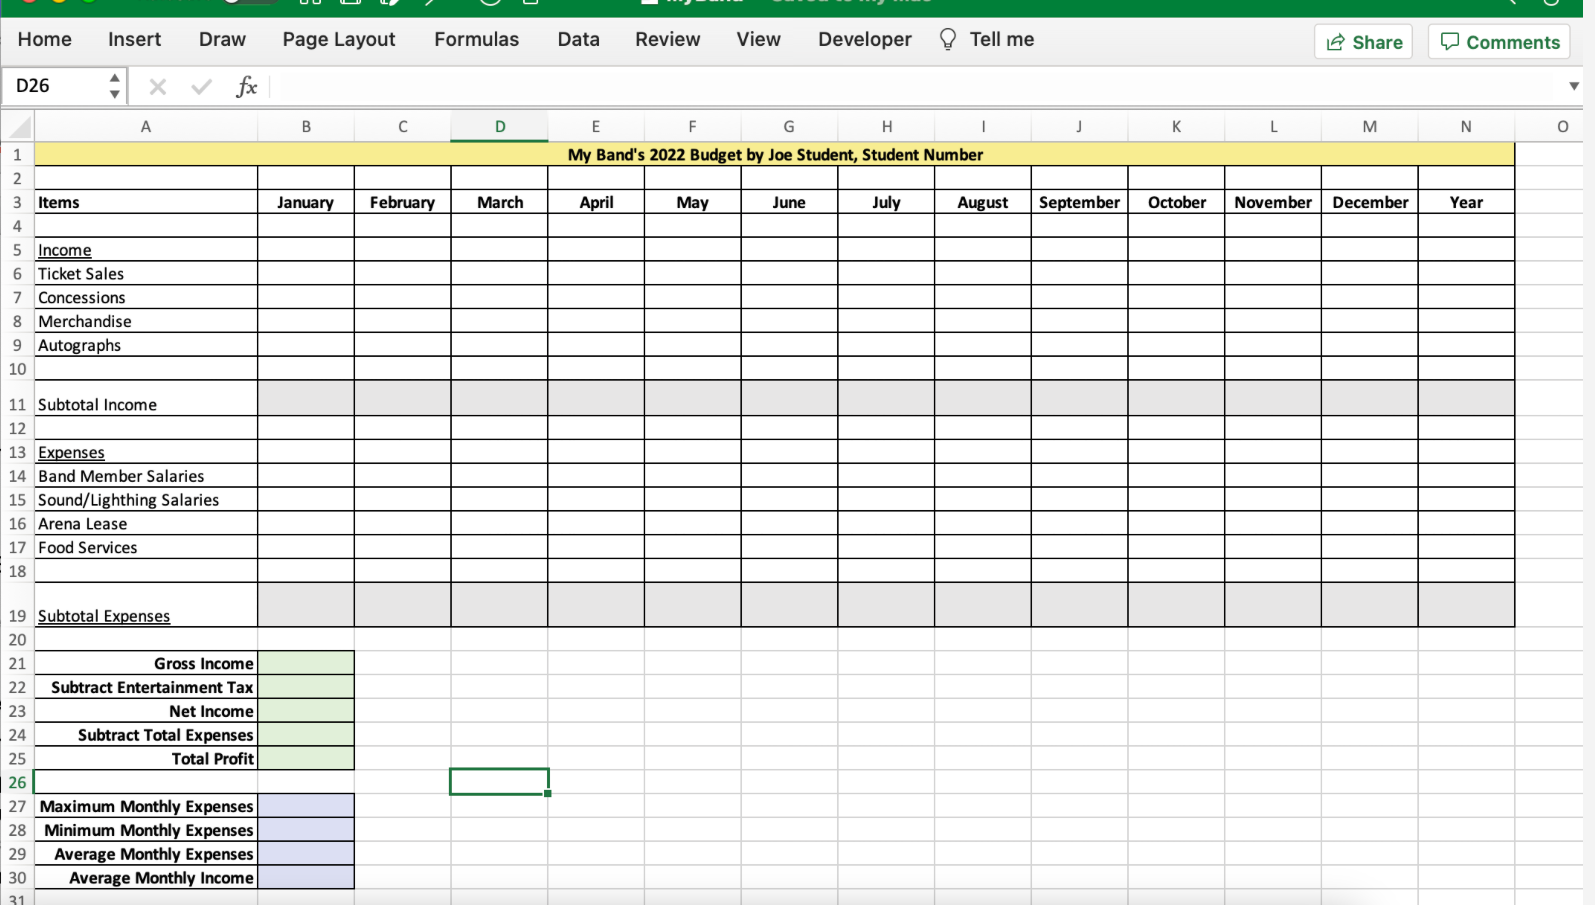 Tournament Director Software Aims to Replace Your Spreadsheet